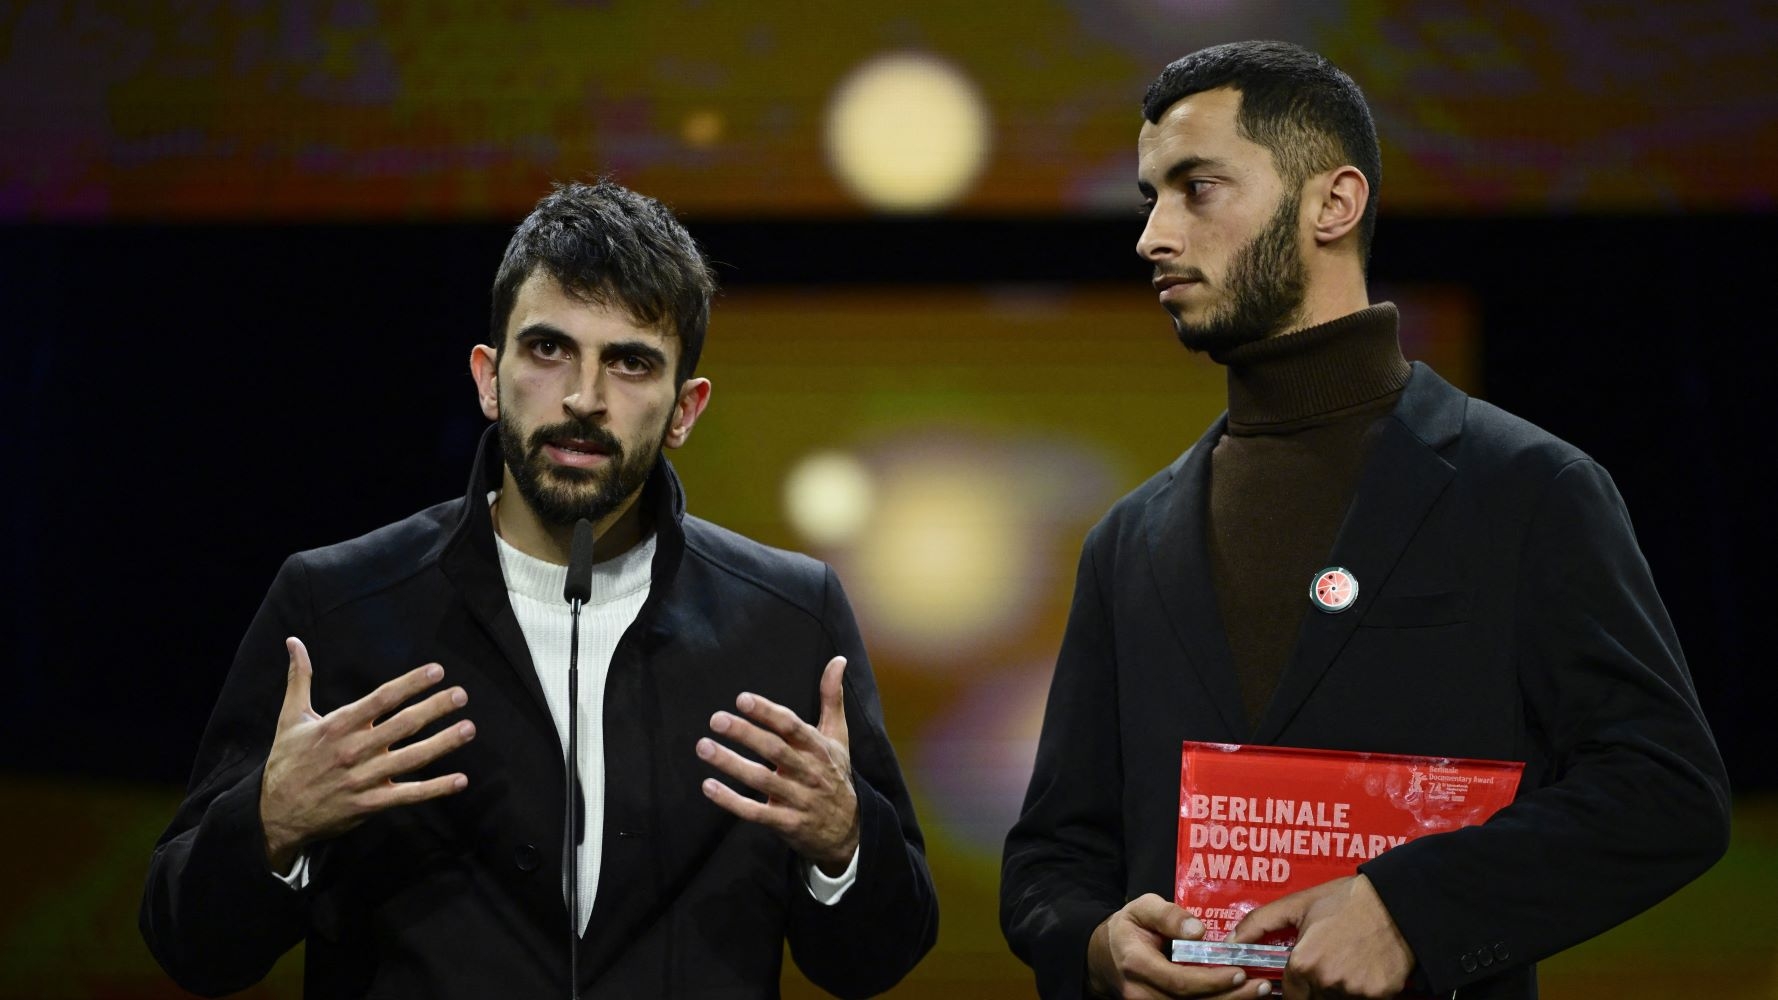 Yuval Abraham (right) delivers his award acceptance speech besides co-director Basel Adra (AFP/John Macdougall)